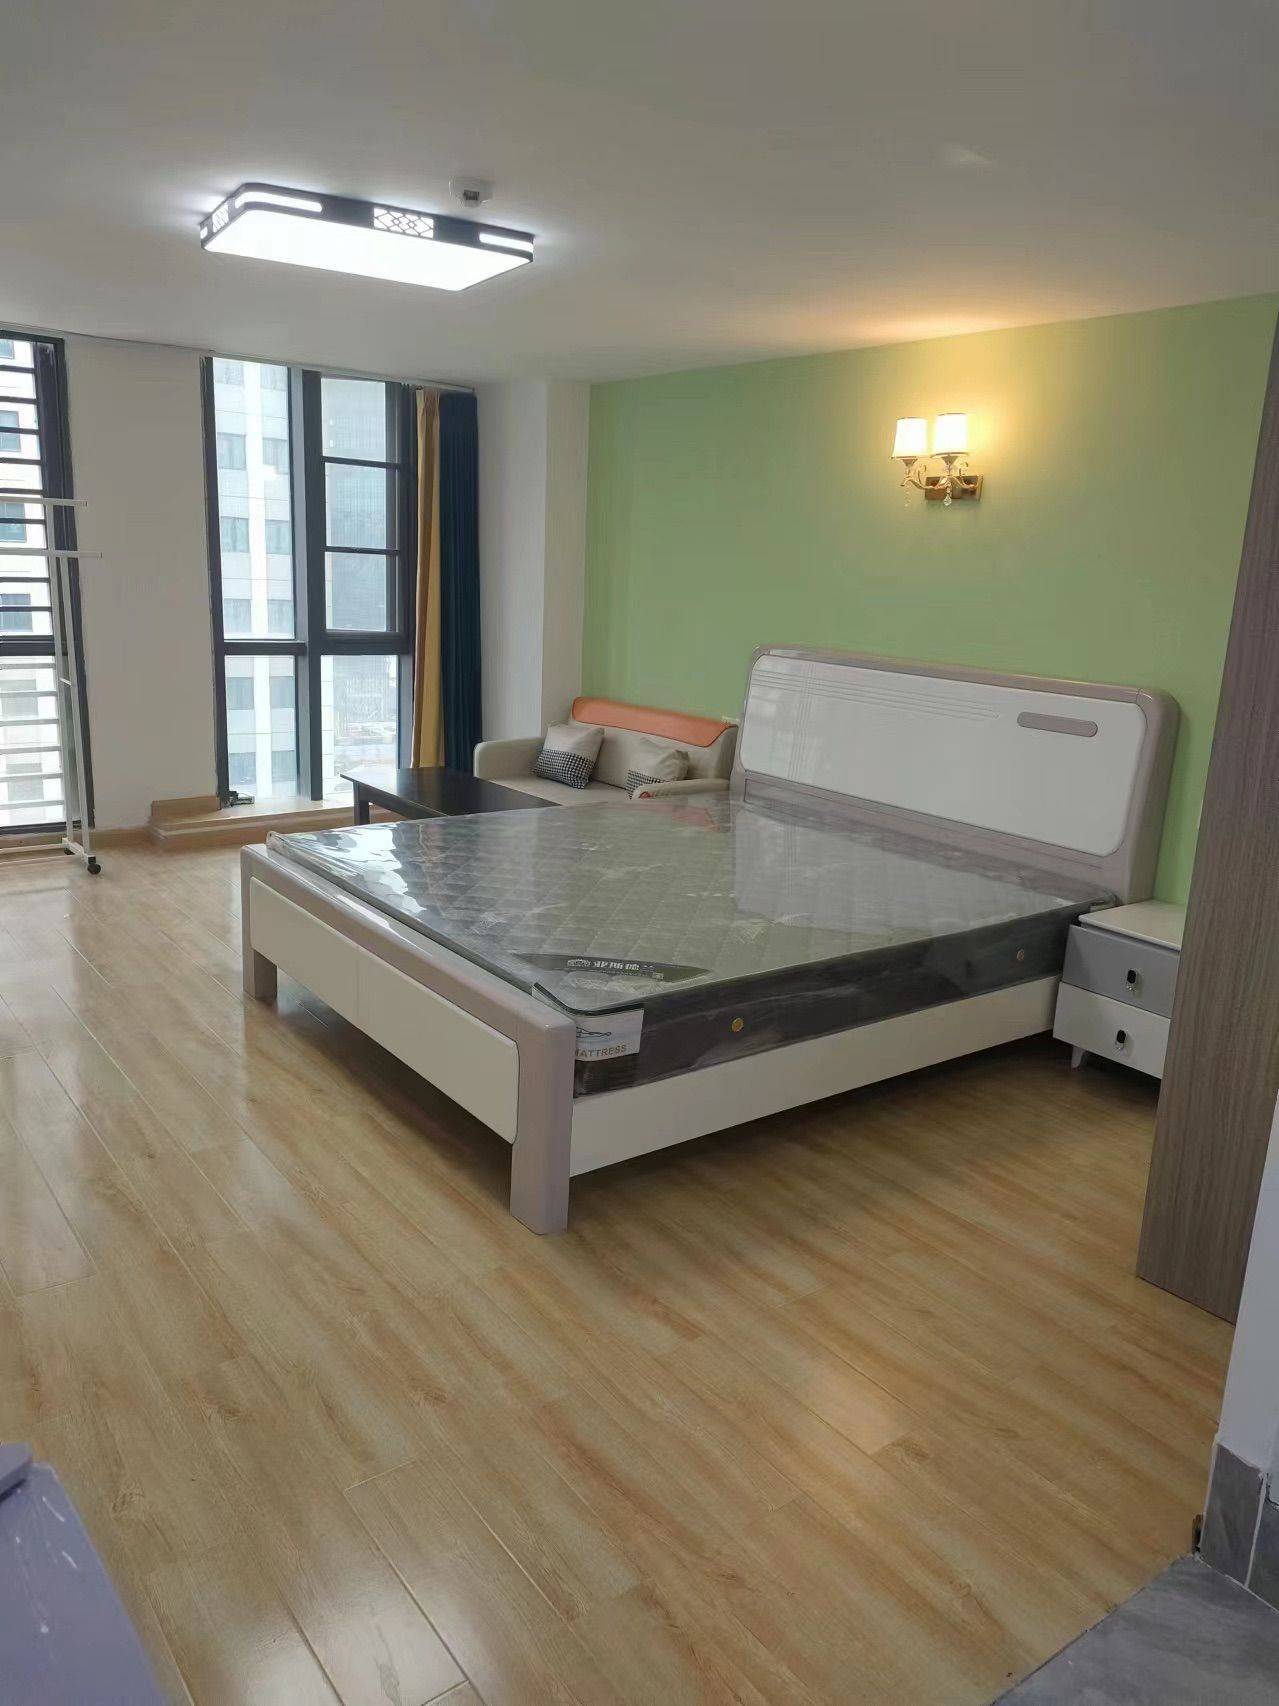 Wuhan-Hongshan-散步时光,Cozy Home,Clean&Comfy,No Gender Limit,Chilled